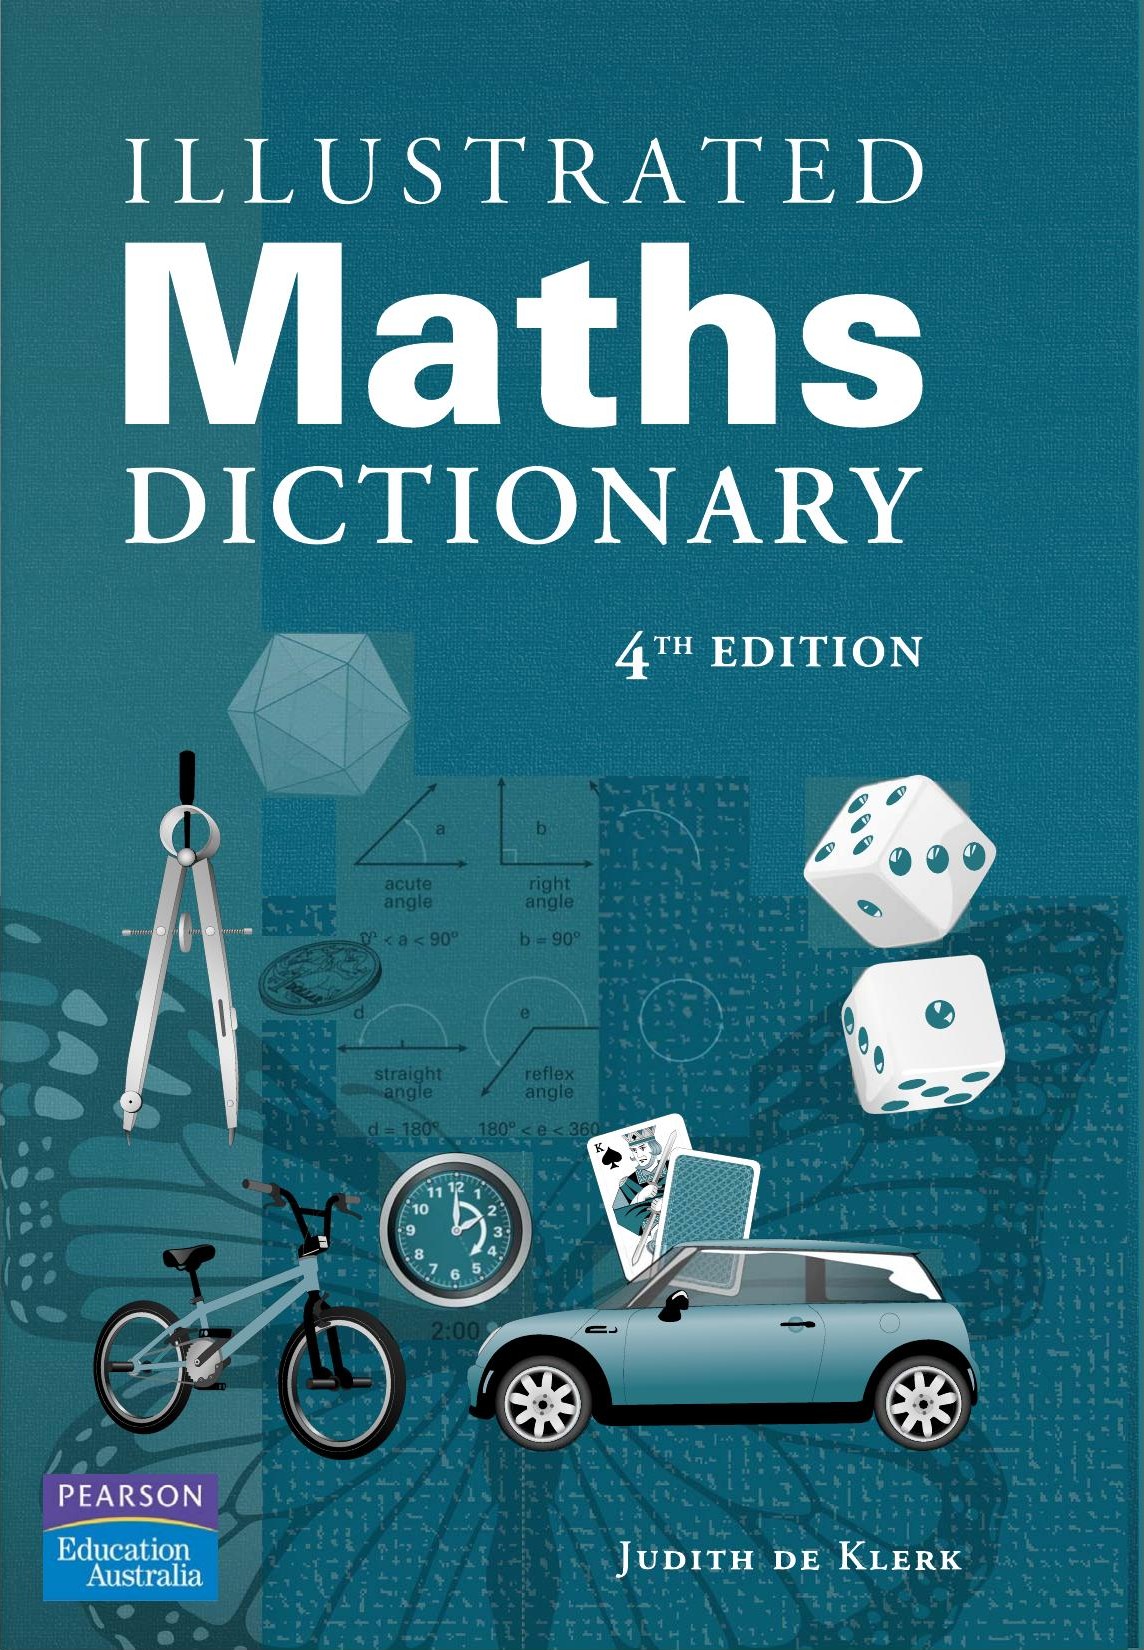 The Illustrated Maths Dictionary - 4th Edition